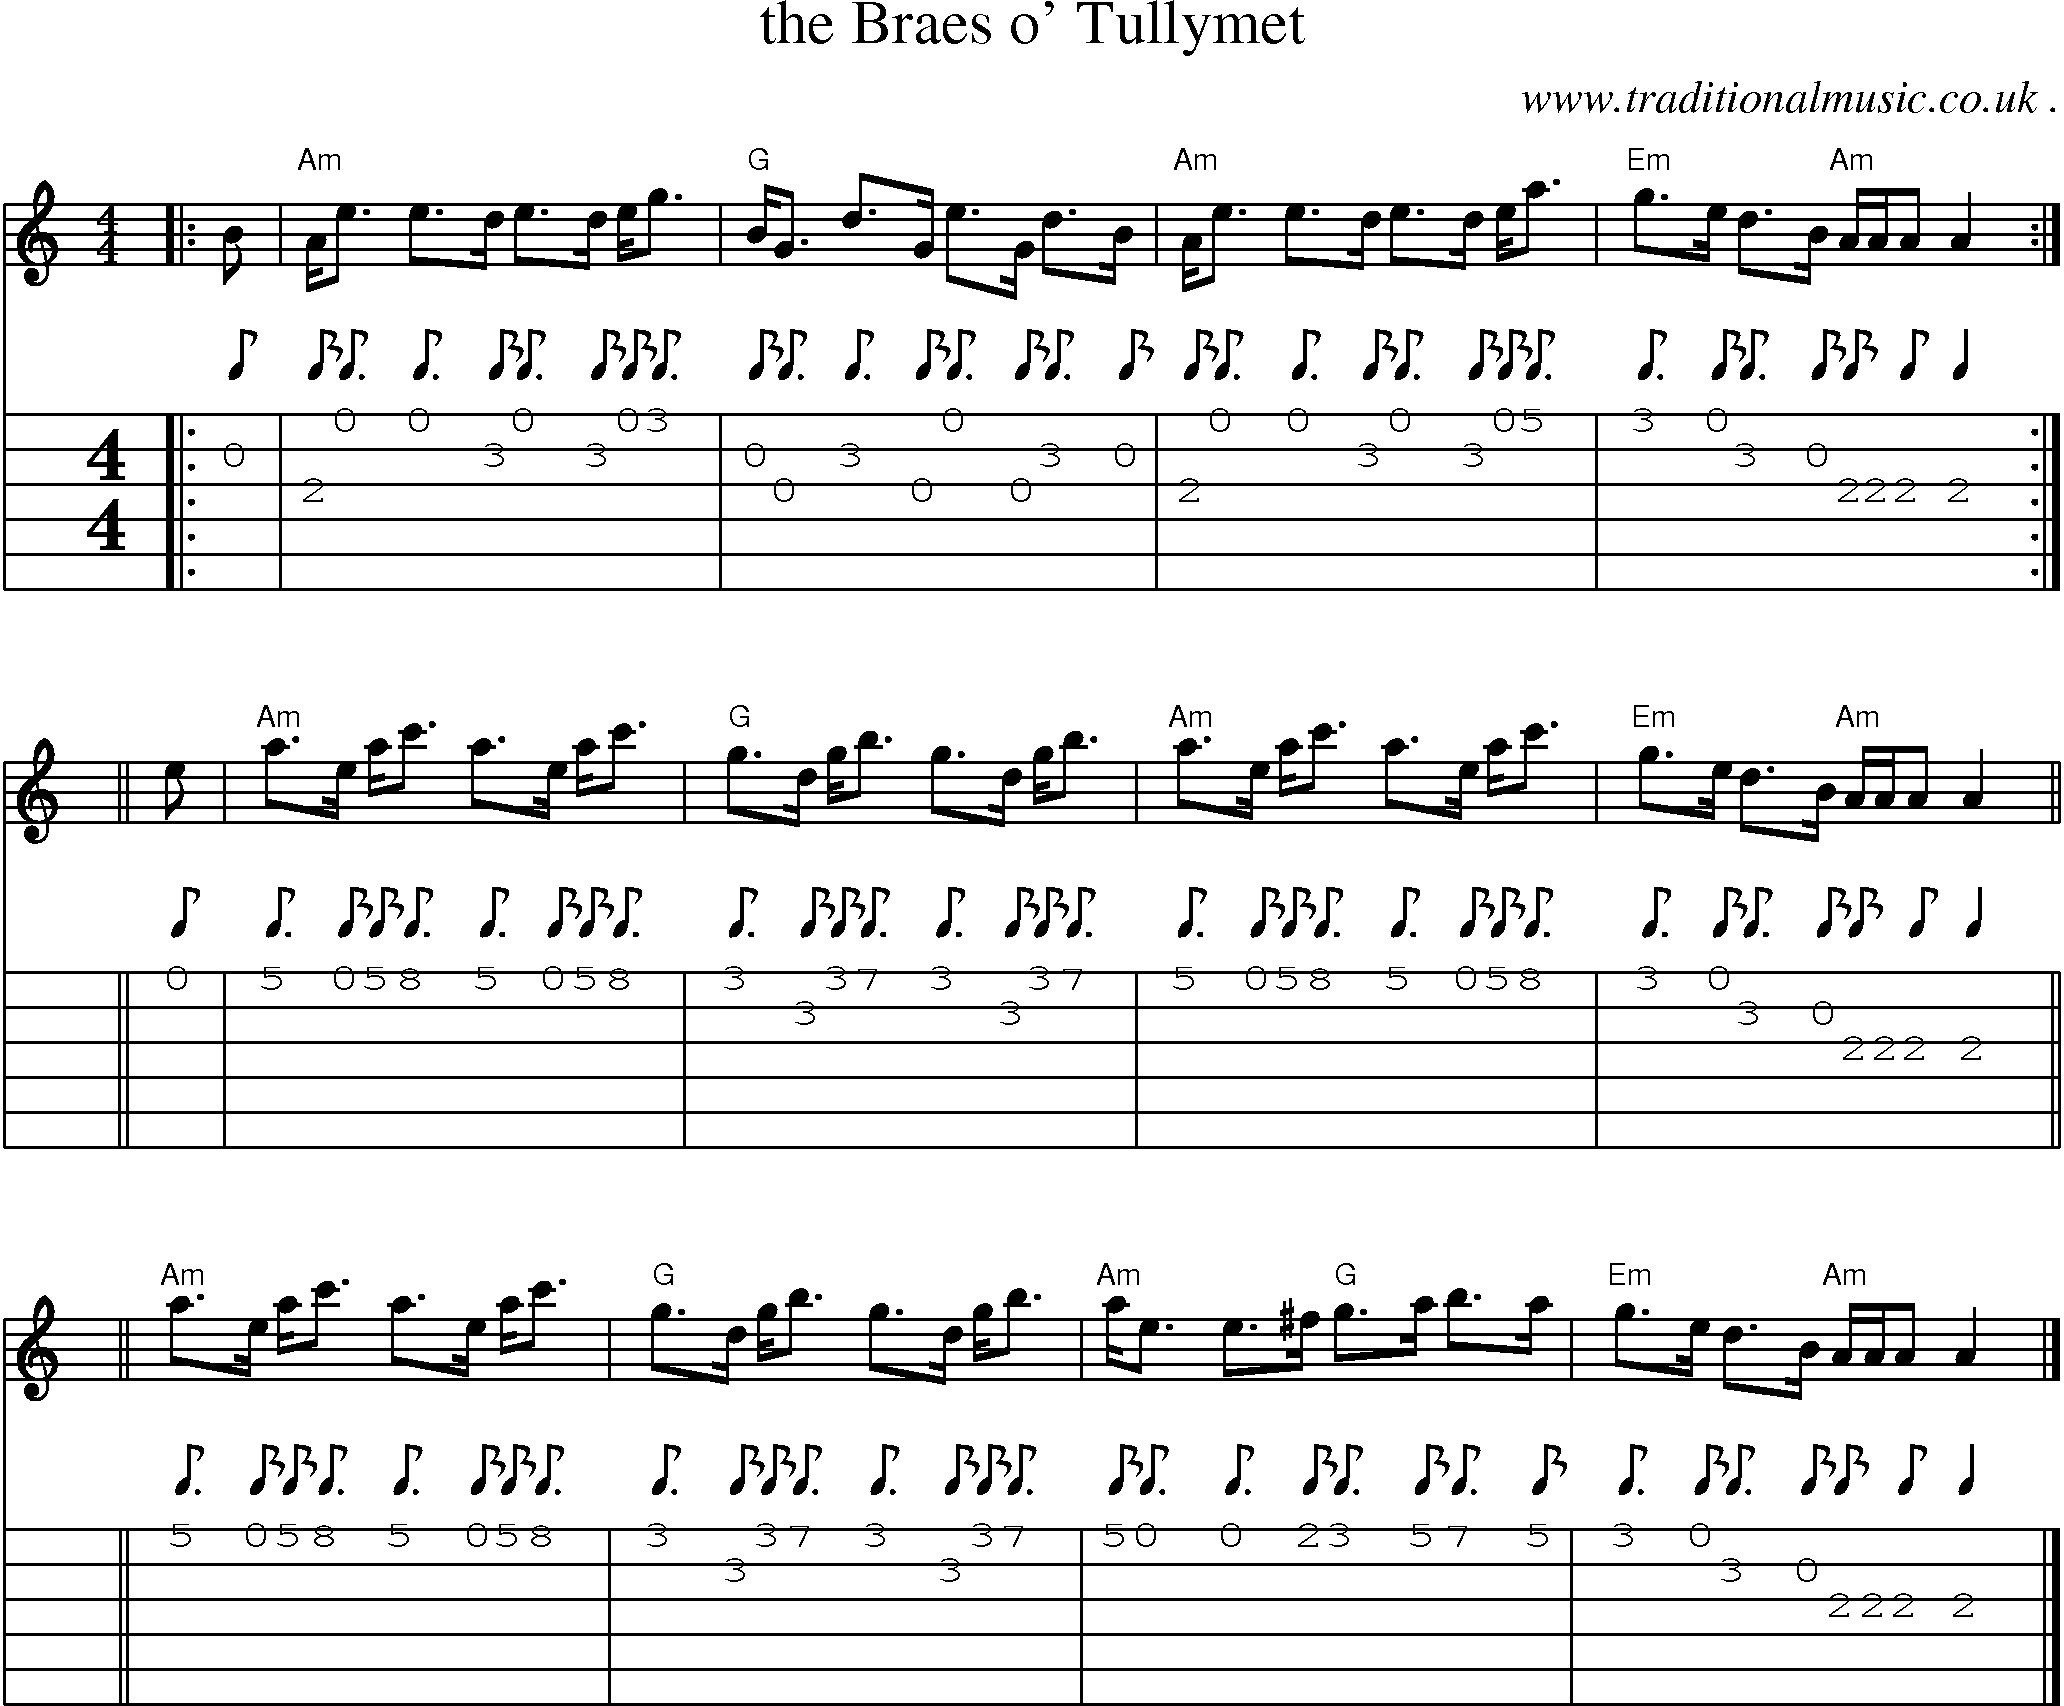 Sheet-music  score, Chords and Guitar Tabs for The Braes O Tullymet